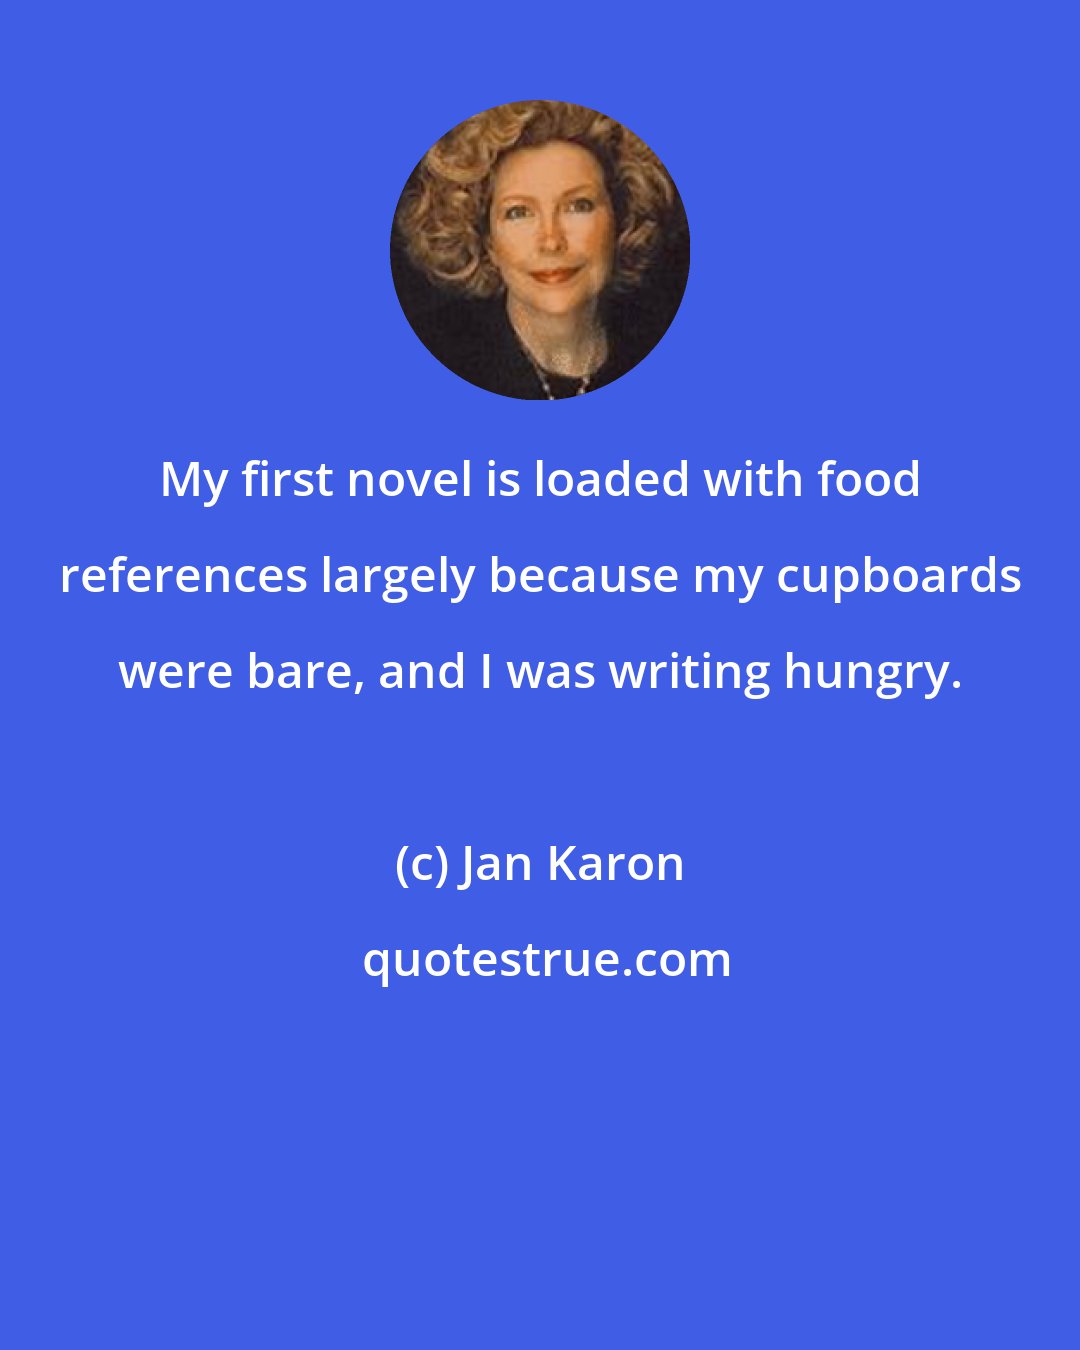 Jan Karon: My first novel is loaded with food references largely because my cupboards were bare, and I was writing hungry.